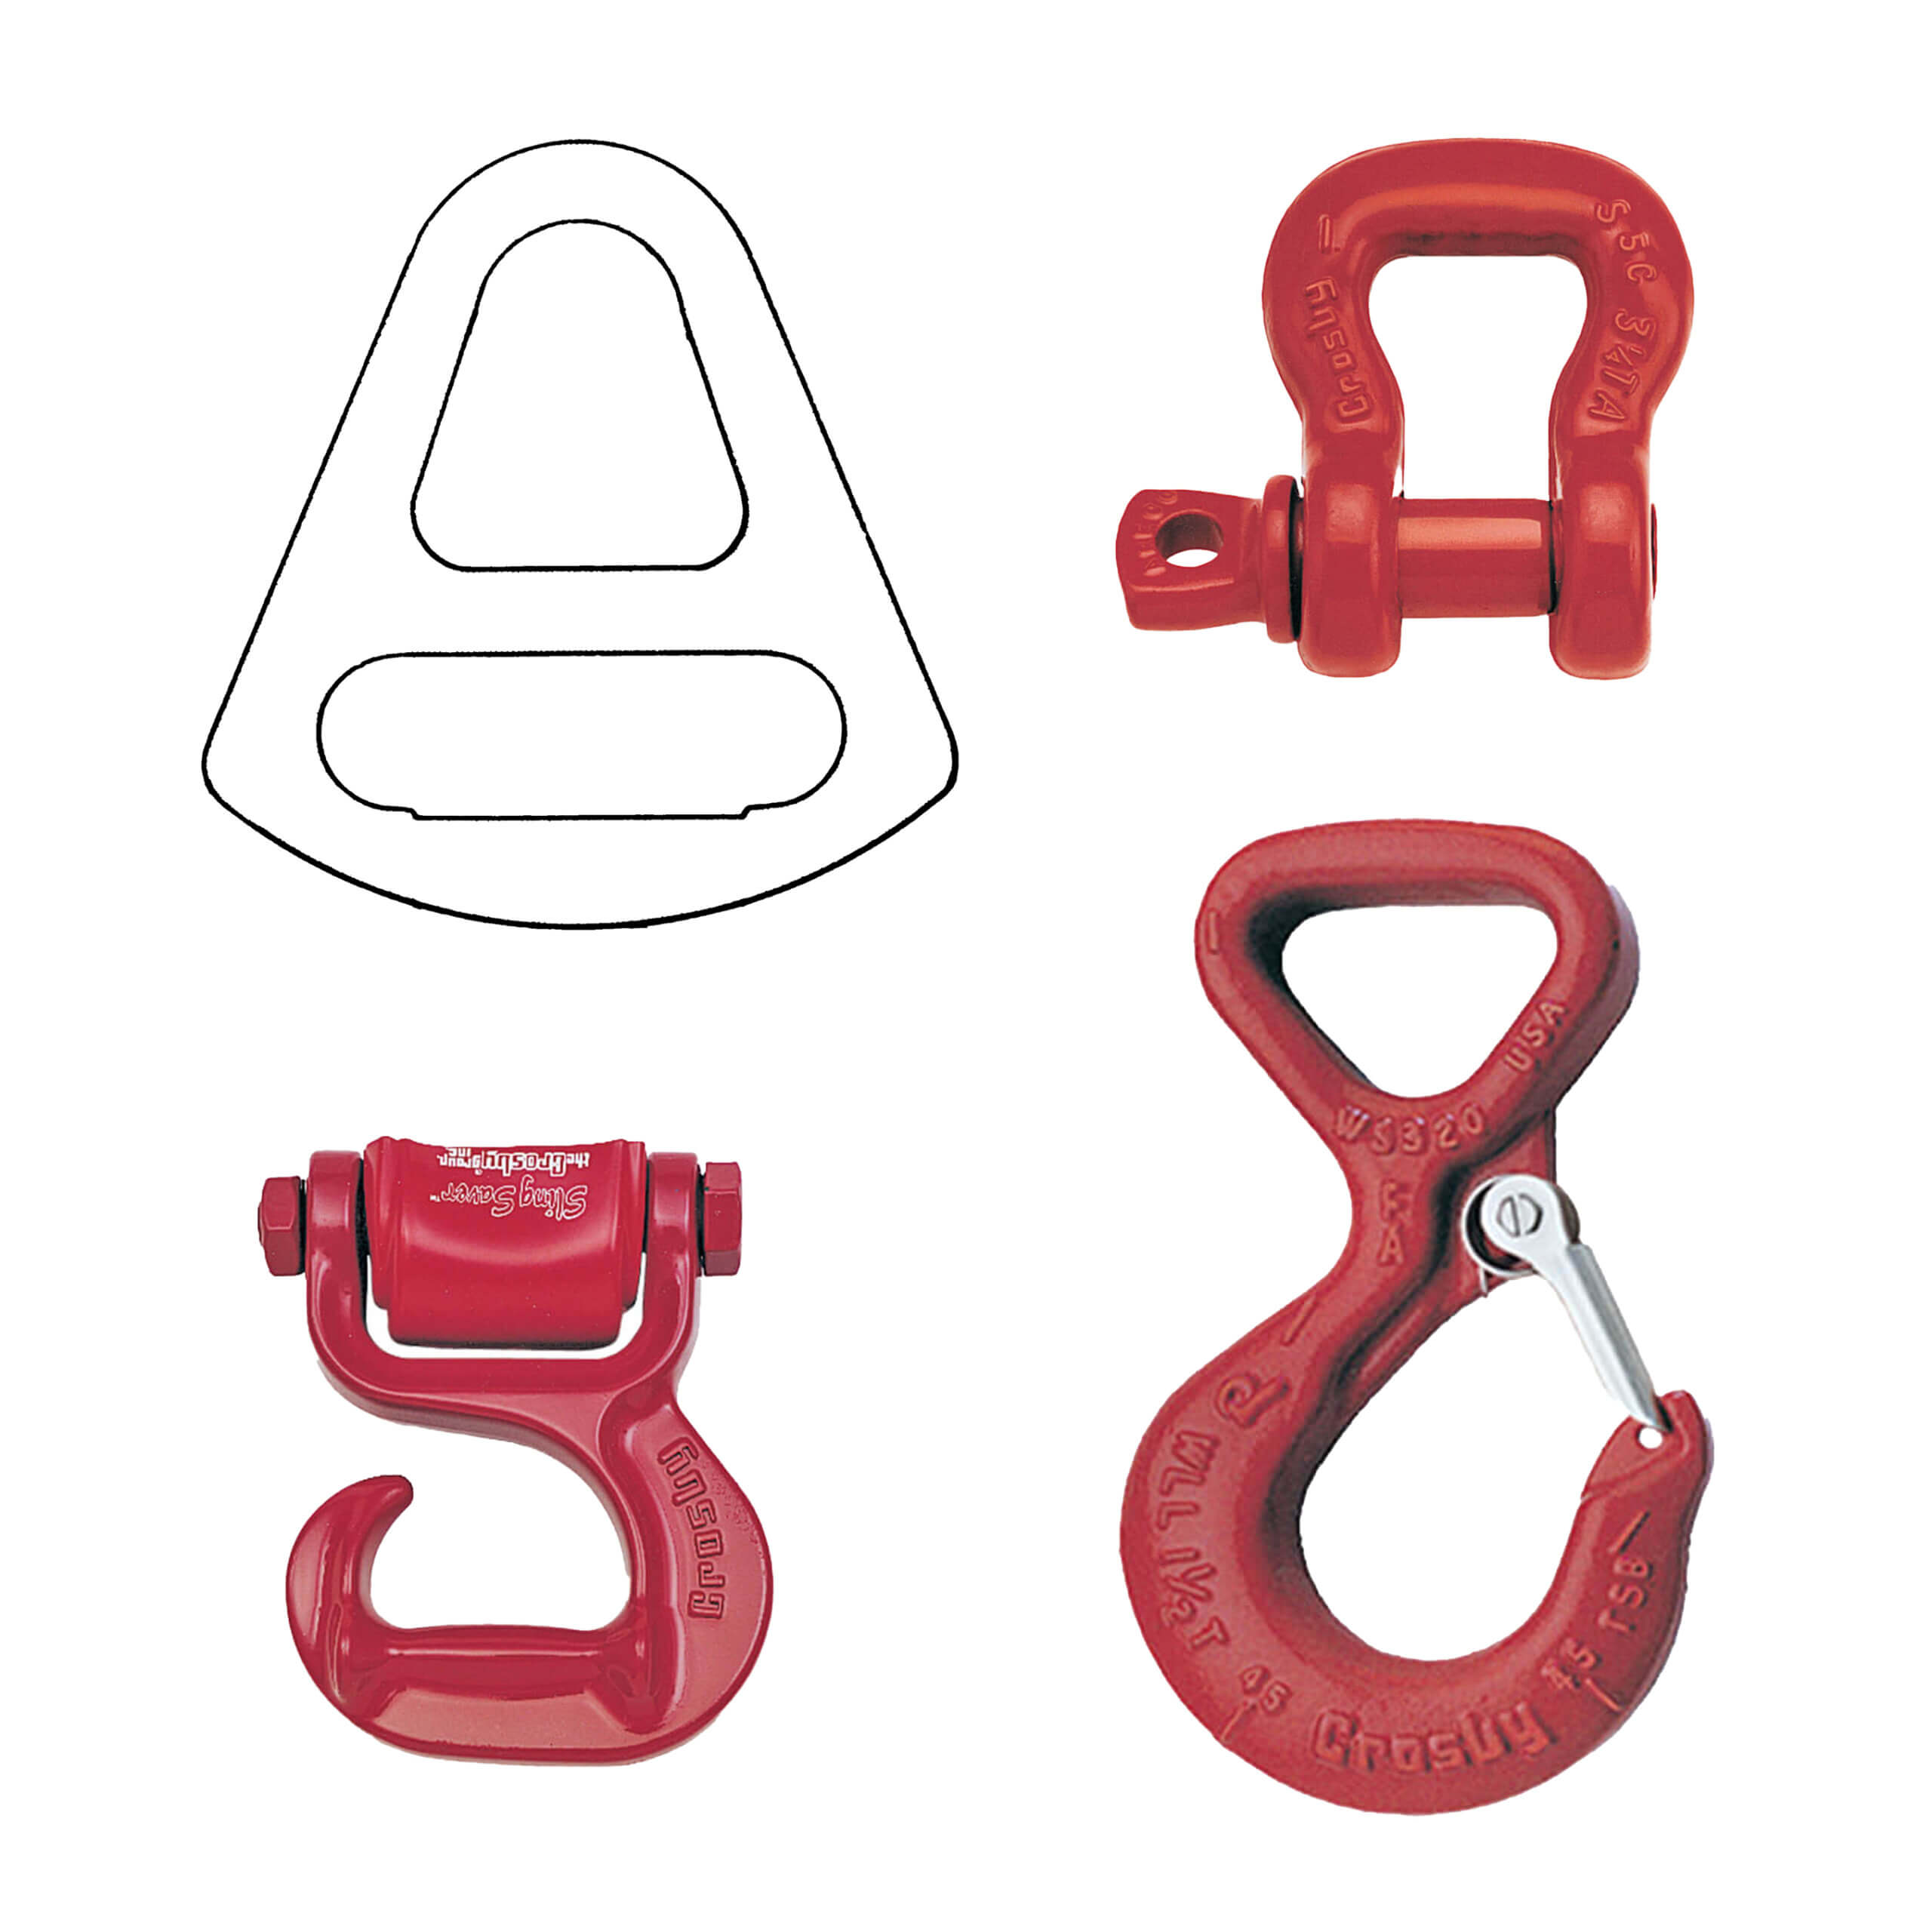 Web Sling Hardware & Accessories